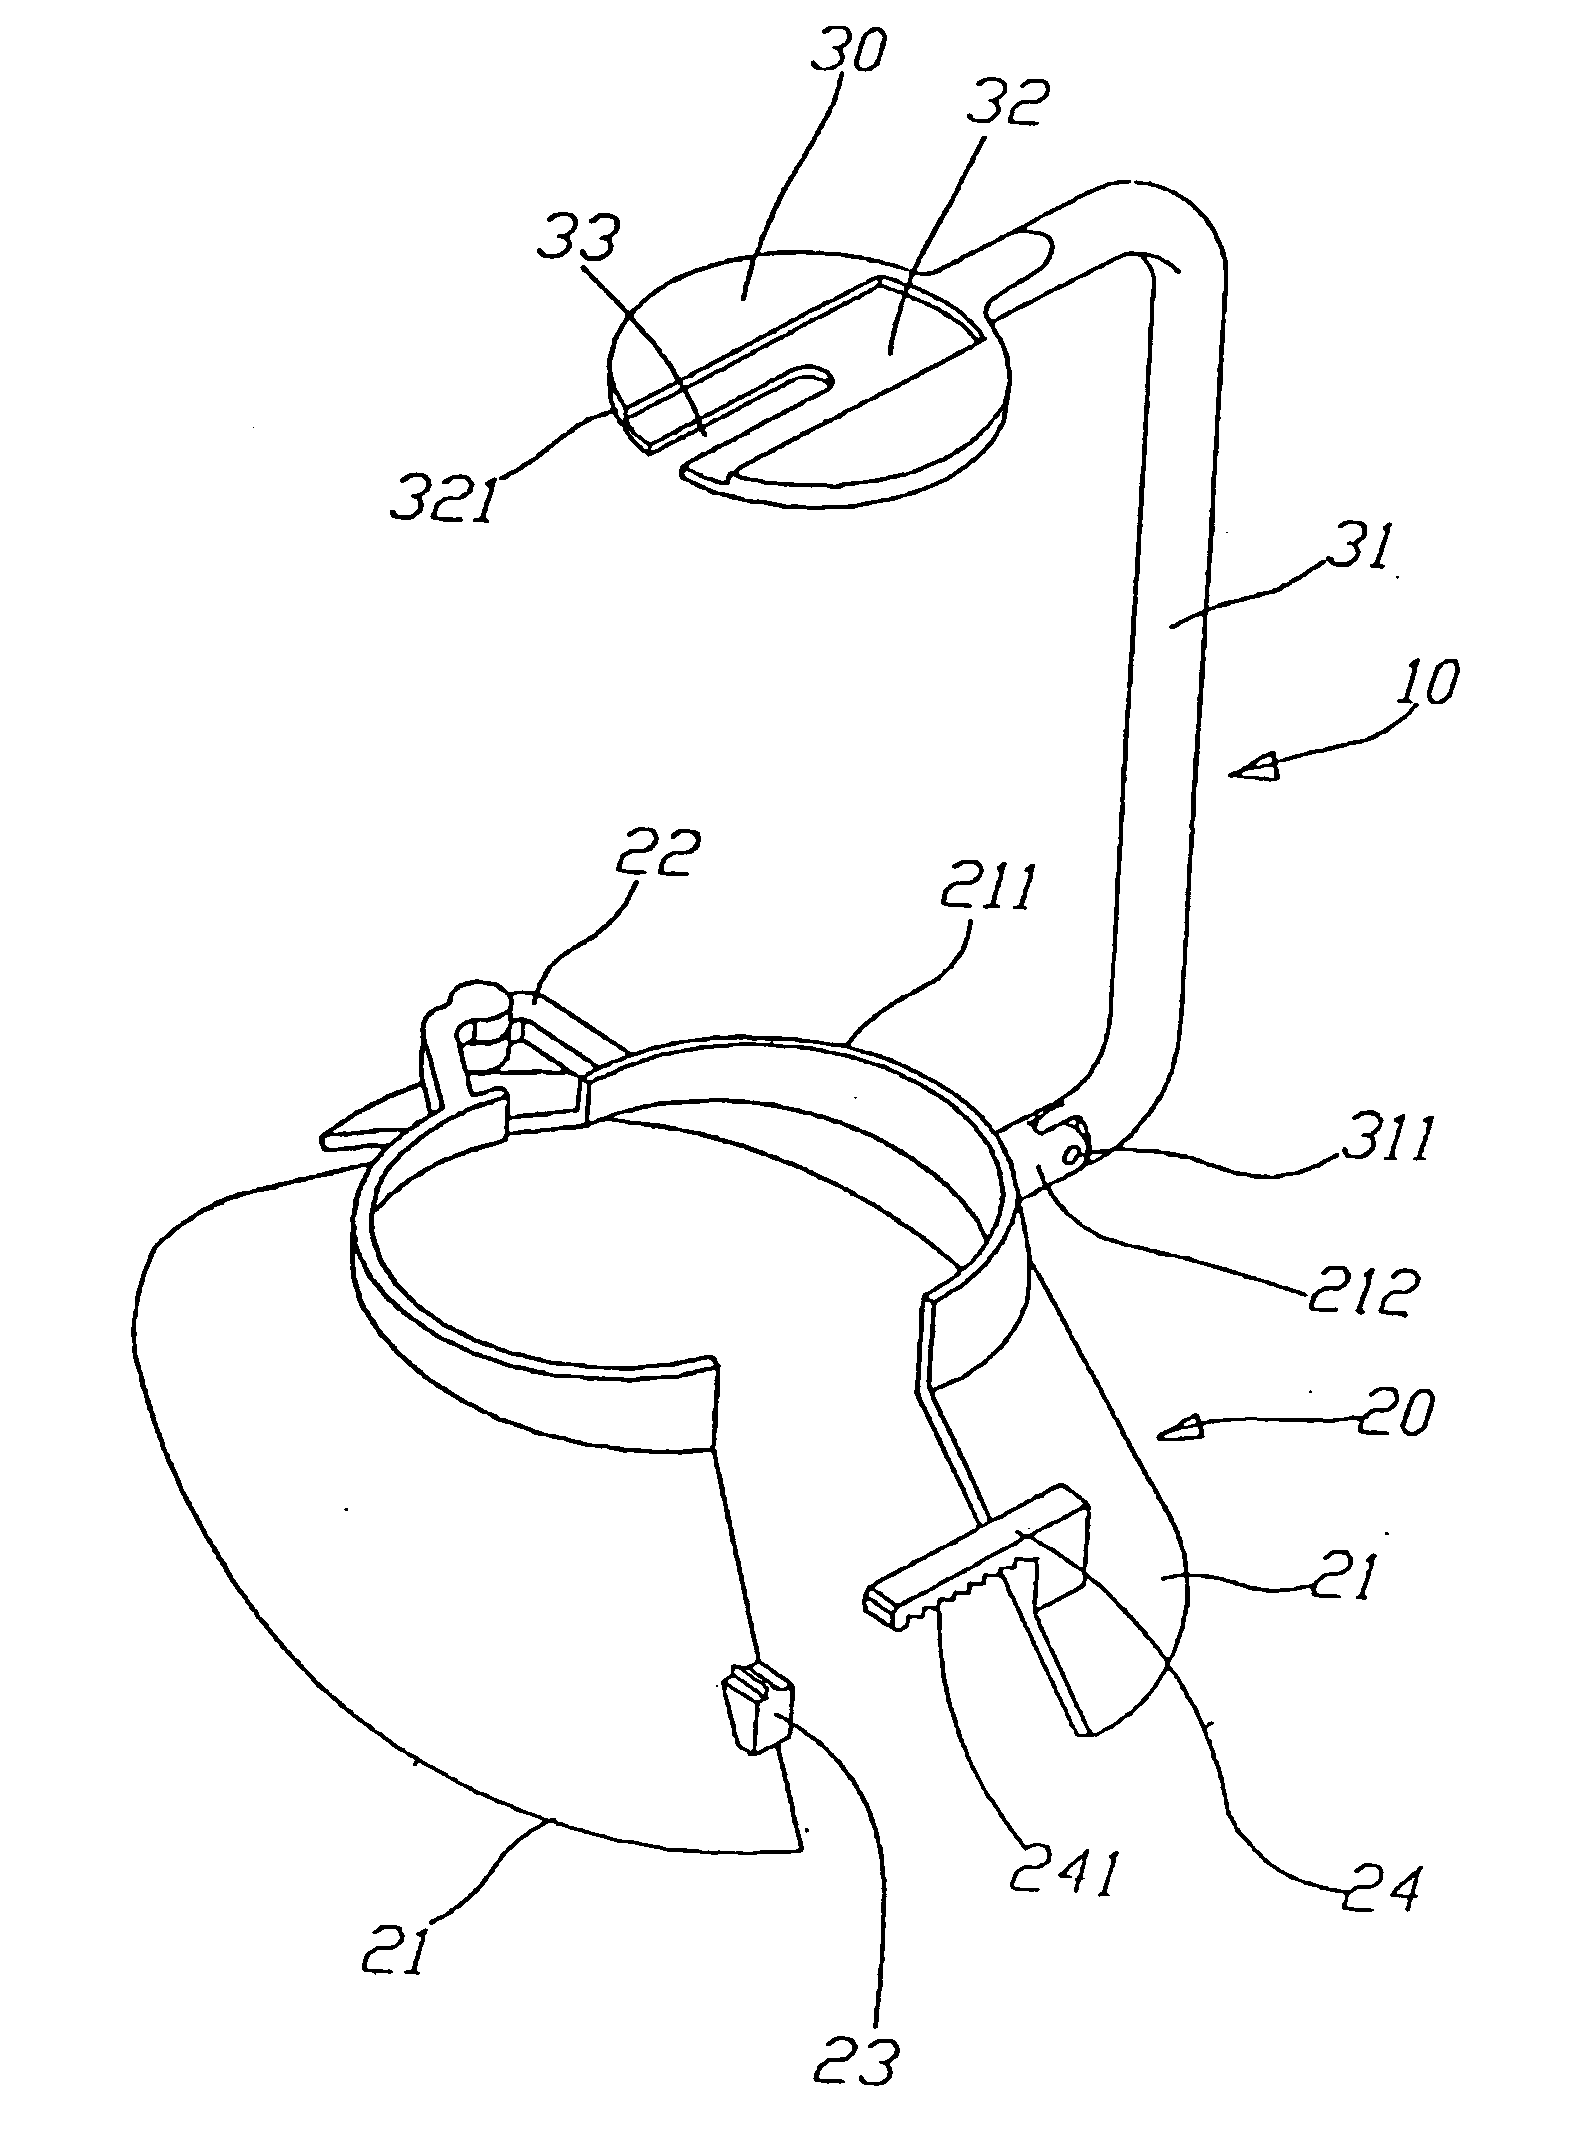 Apparatus for fitting the protecting femoral neck device